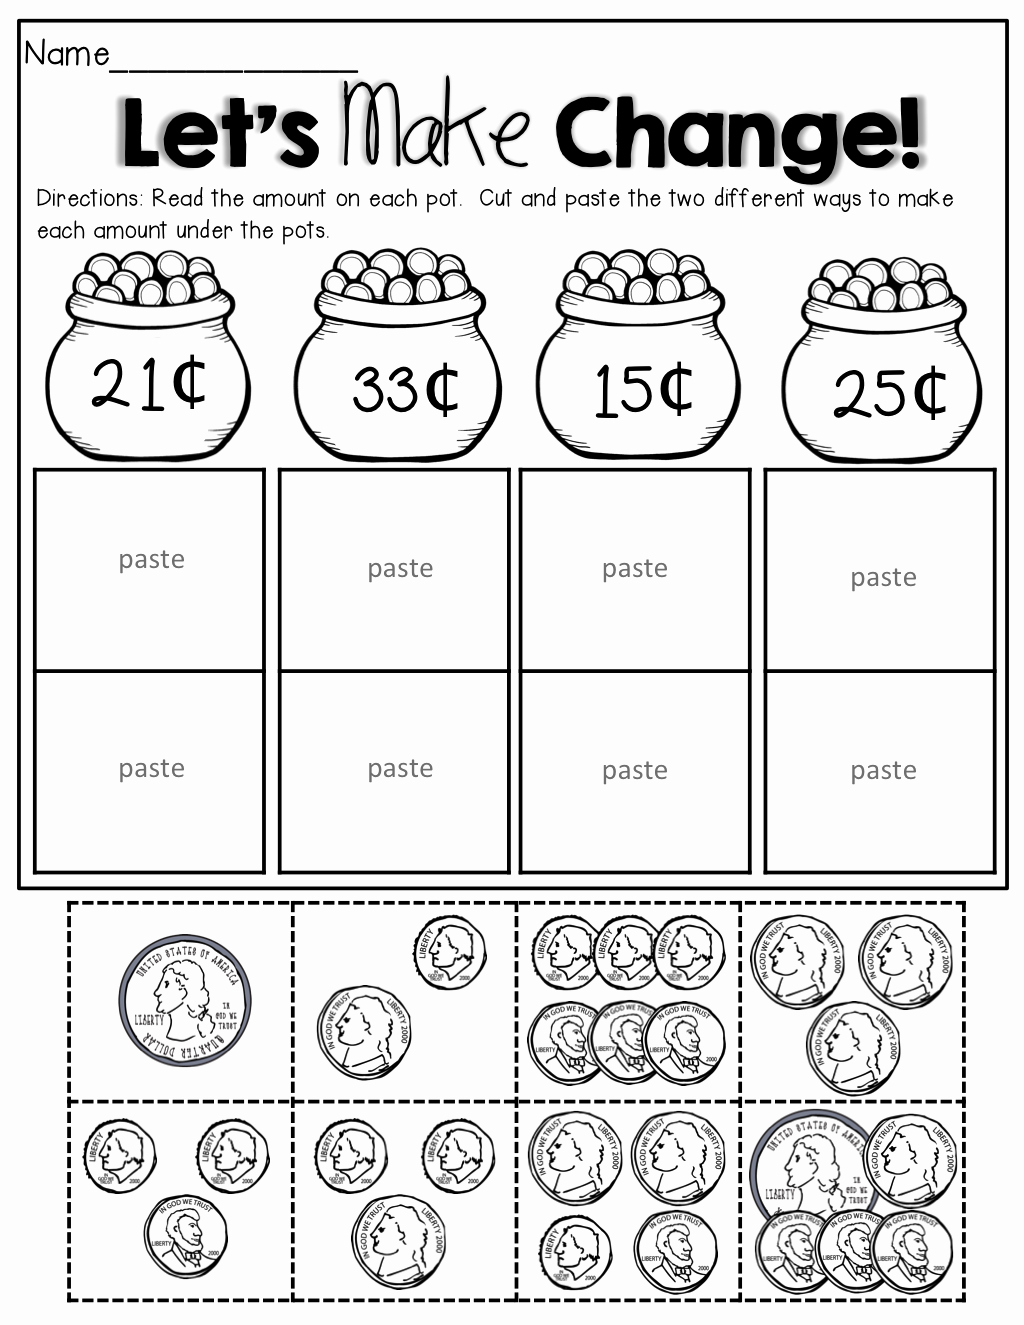 Counting Coins Worksheets Beautiful Counting Coins Cut and Paste